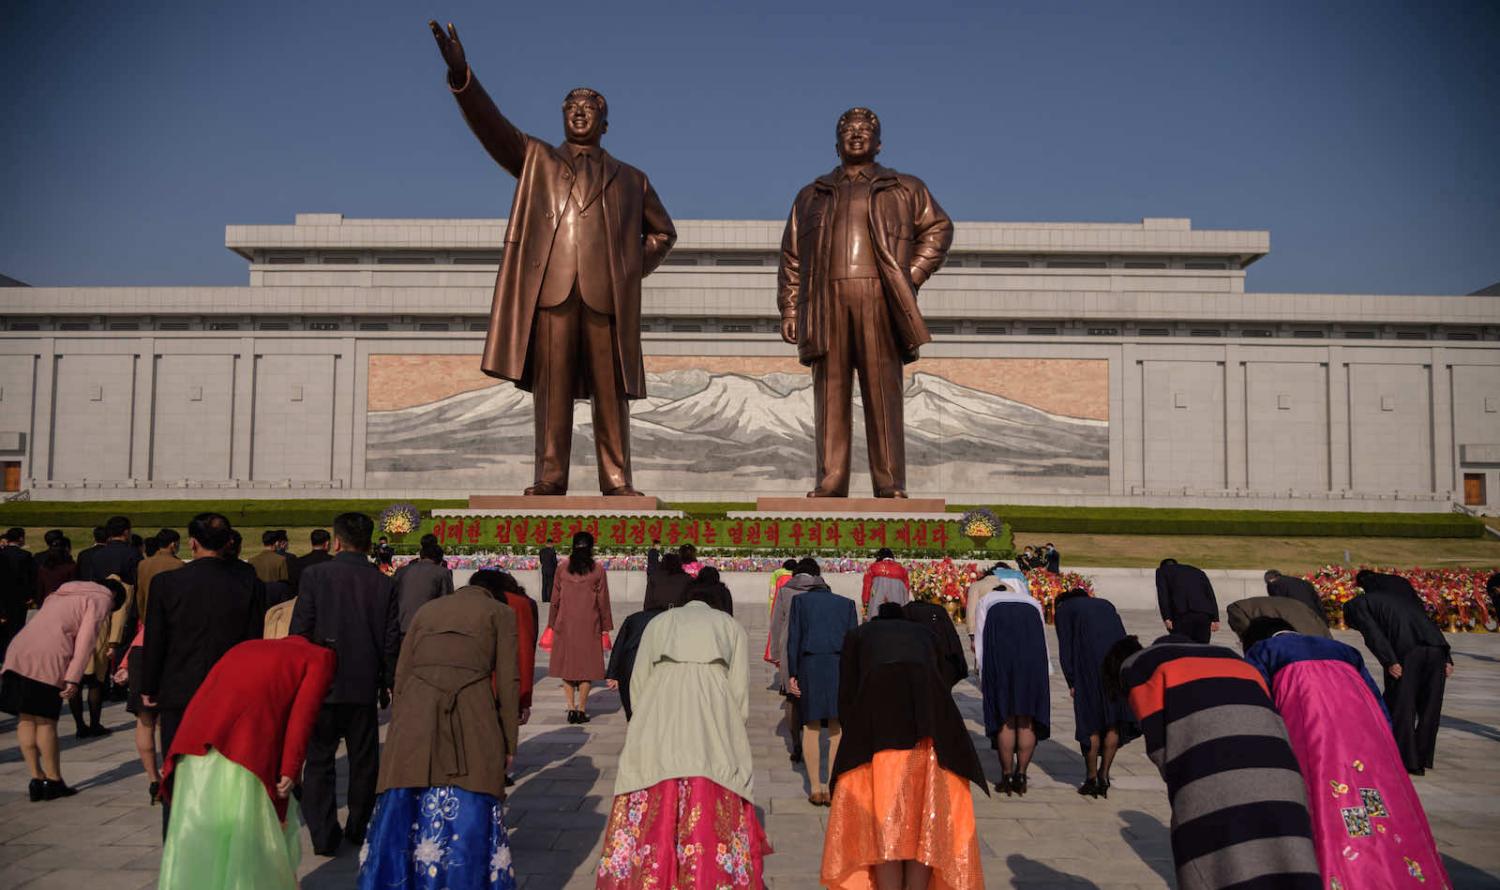 Rulers reign supreme, in the “interests of the people” (Kim Won Jin/AFP via Getty Images)